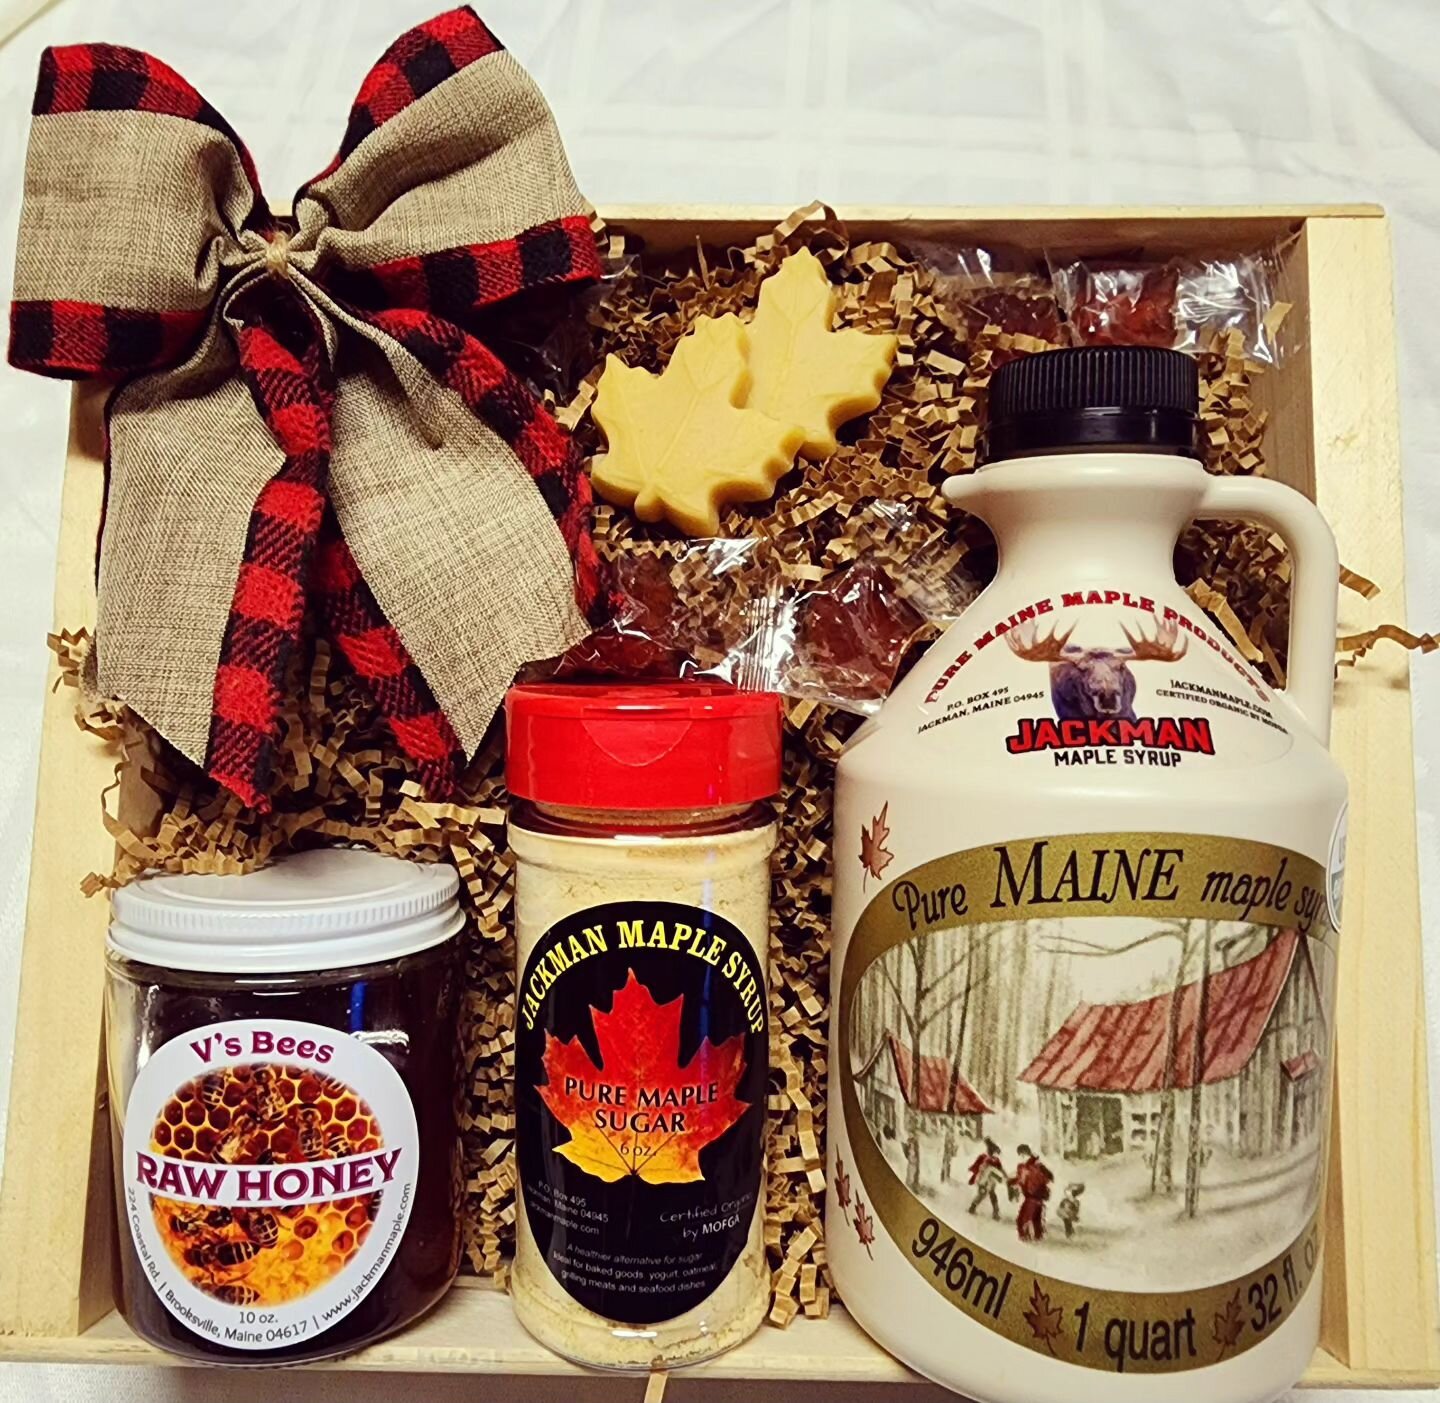 ~Maple and Honey Gift Box ~
Gift giving season is here and we have a full selection of all your favorite maple products! 
Shop our online store at www.jackmanmaple.com